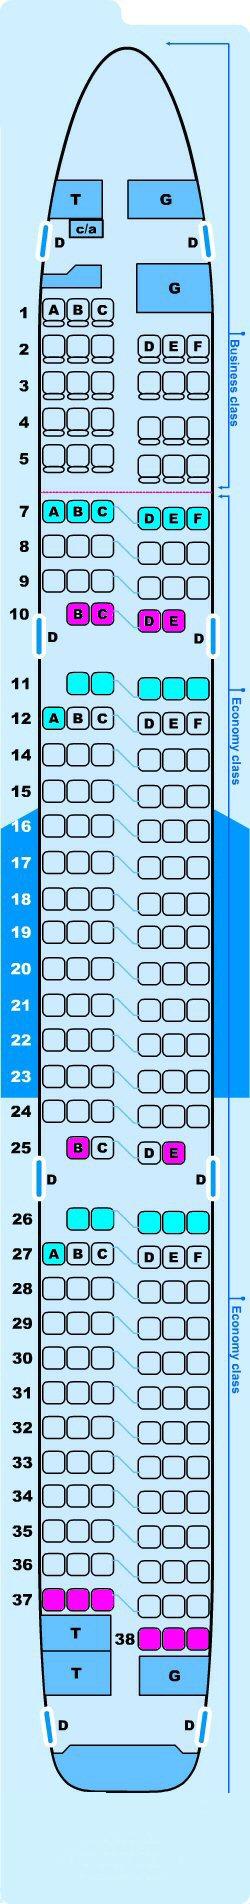 Seat map for Airbus A321 200